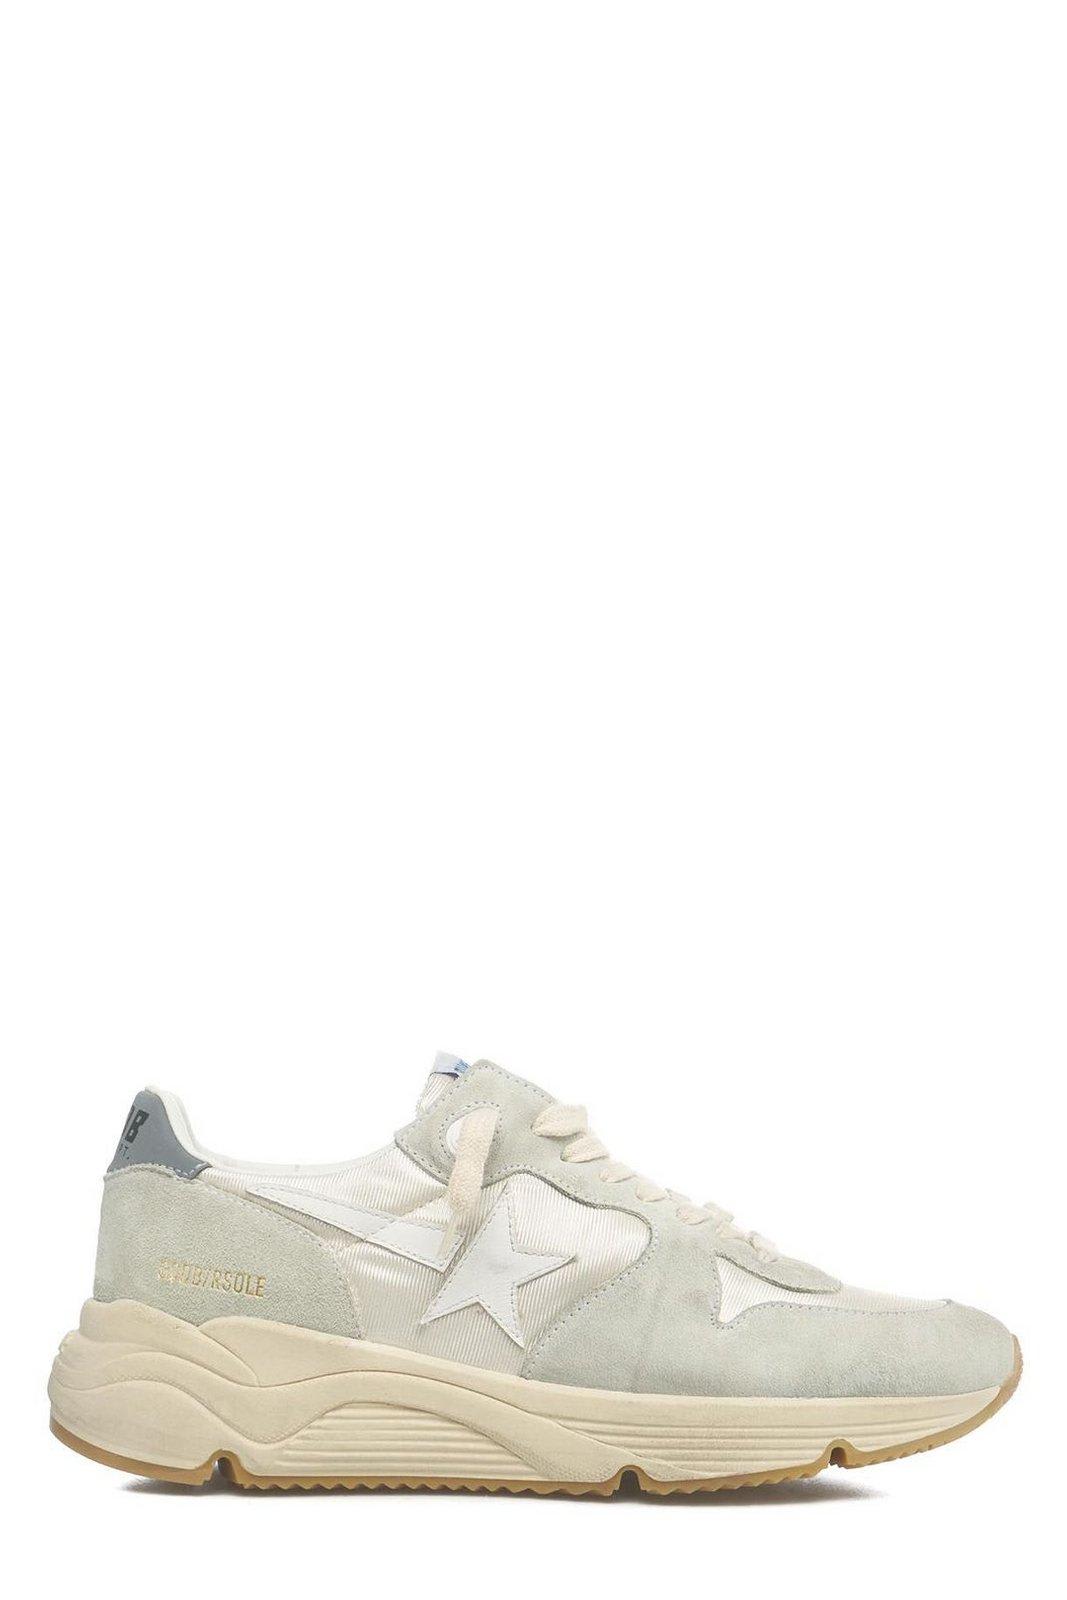 Golden Goose Running Sole Lace-up Sneakers In Cream Ice White